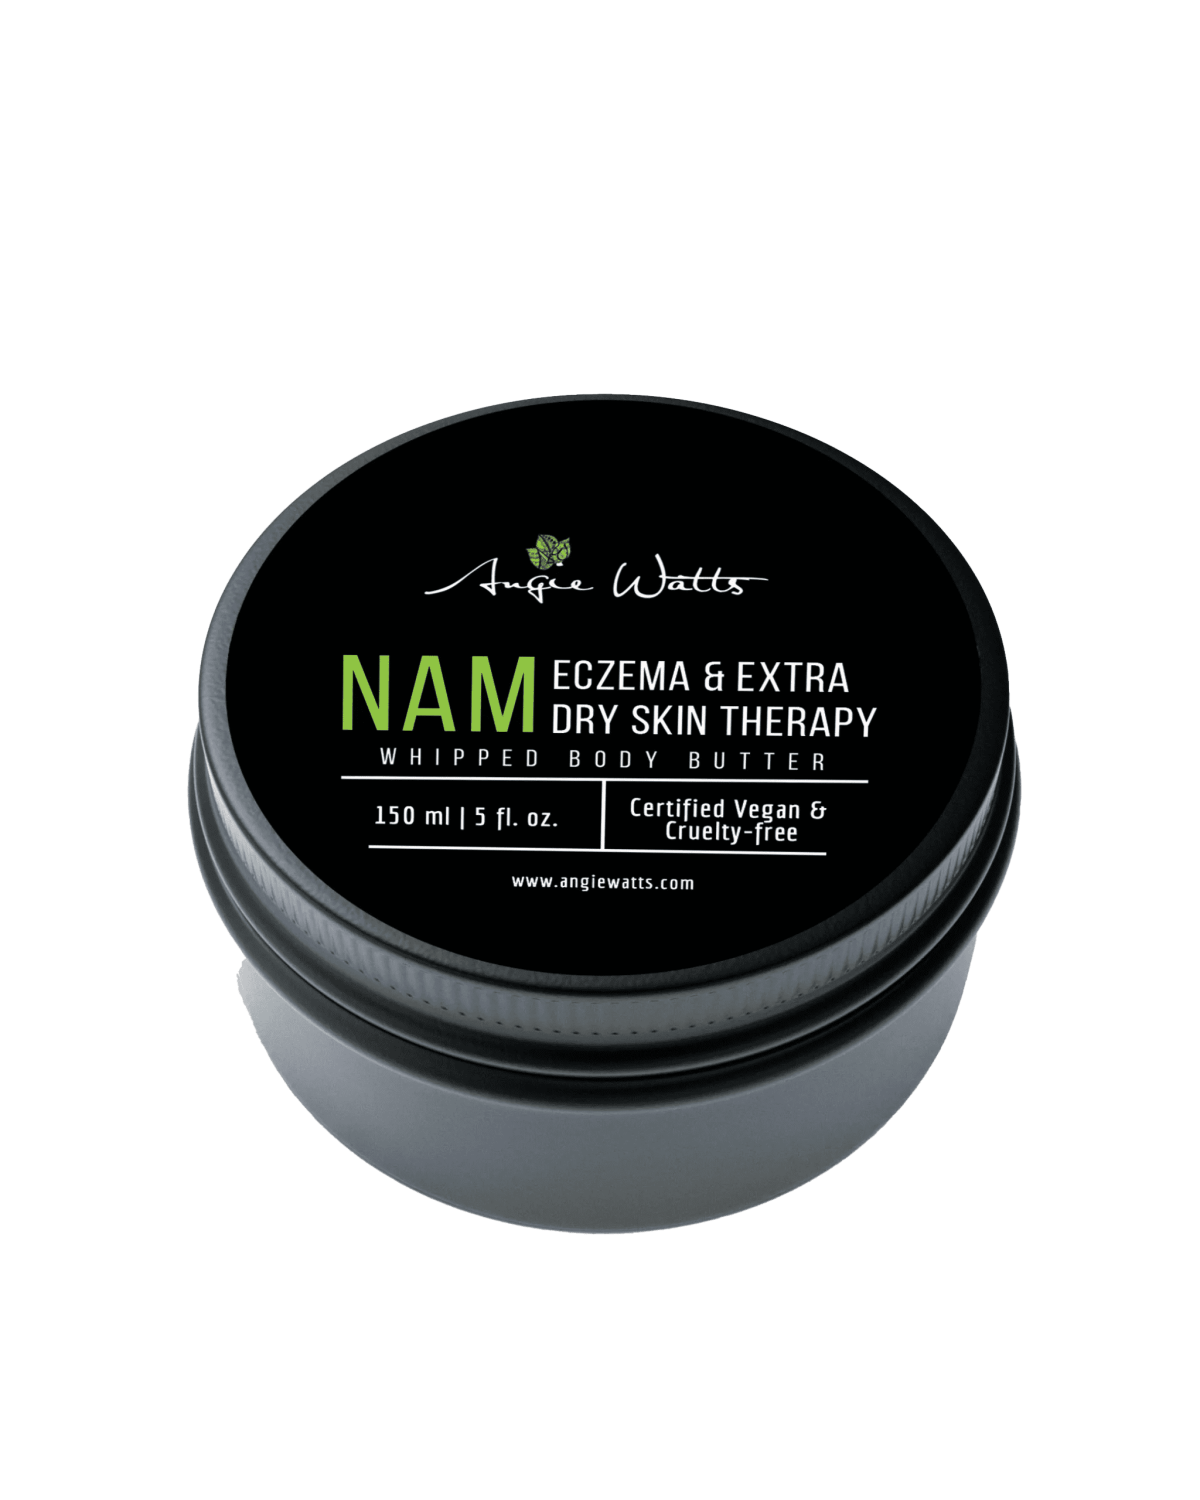 Angie Watts - Nam Eczema & Extra Dry Skin Therapy (Whipped Body Butter)